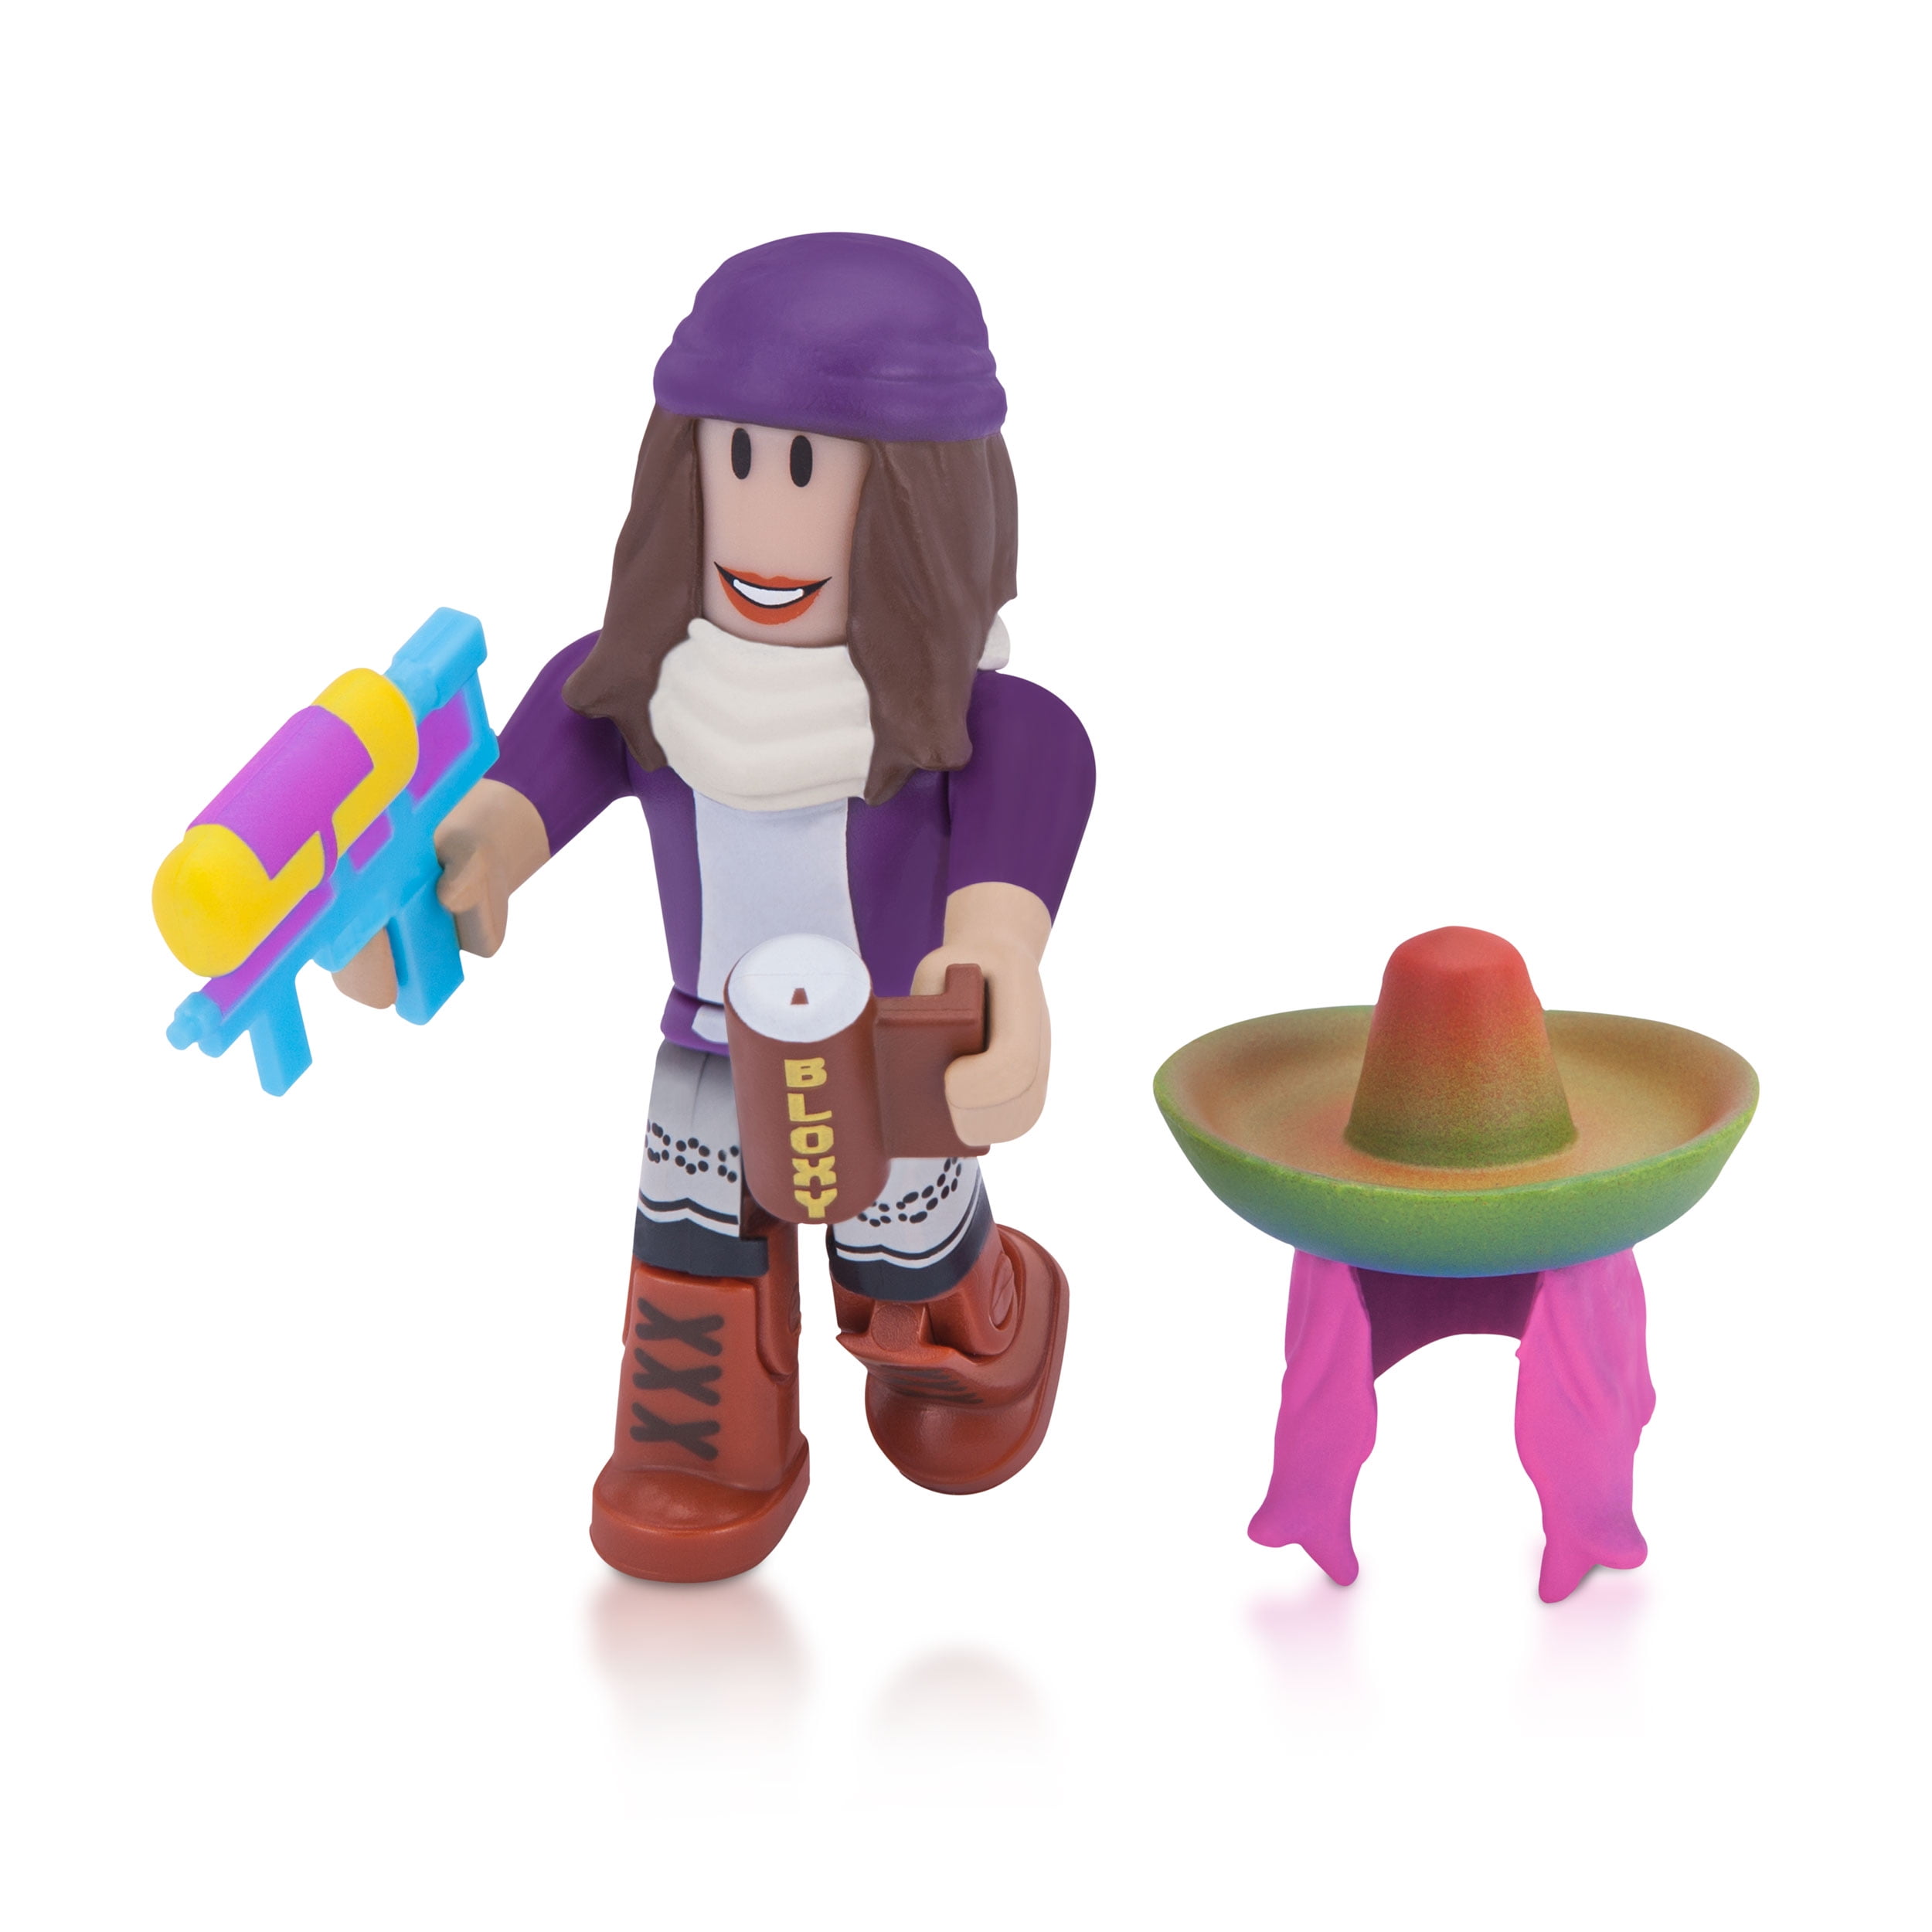 Roblox Celebrity Collection Single Figure Pack Styles May Vary Includes 1 Exclusive Virtual Item Walmart Com Walmart Com - roblox celebrity collection fashion famous playset includes exclusive virtual item walmart com walmart com